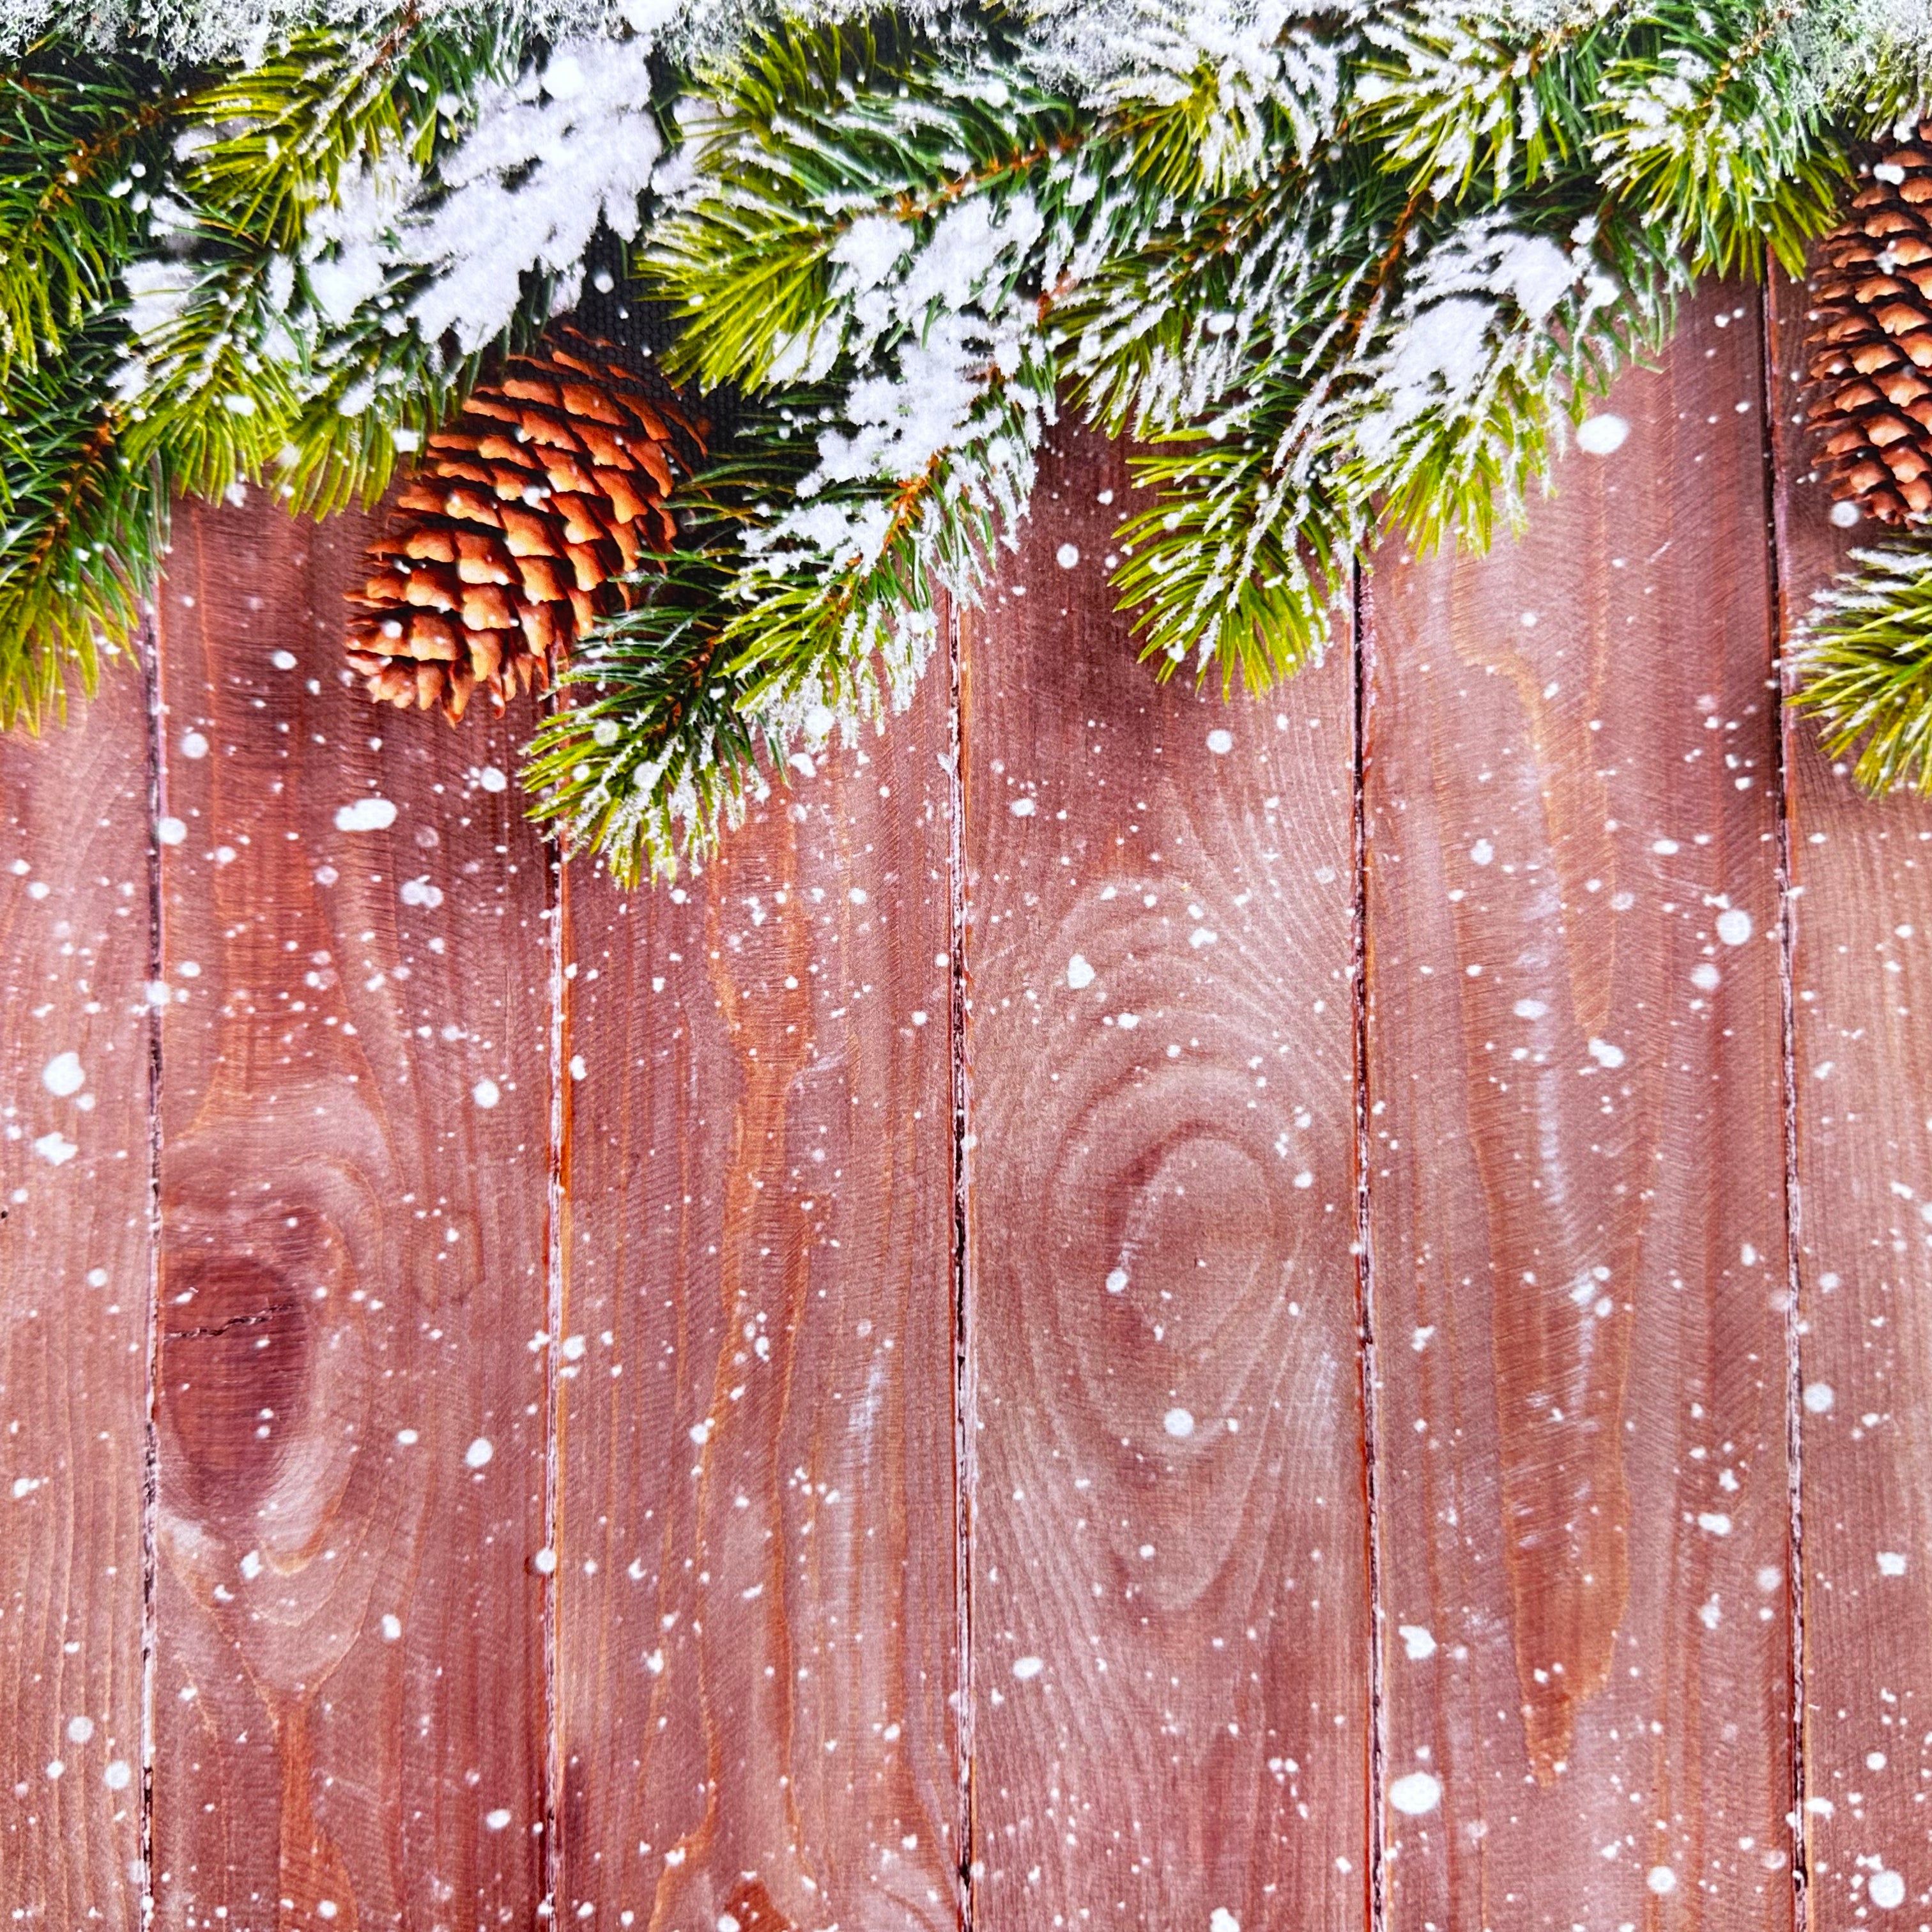 Snowy Garland Wood Effect Canvas Photography Background